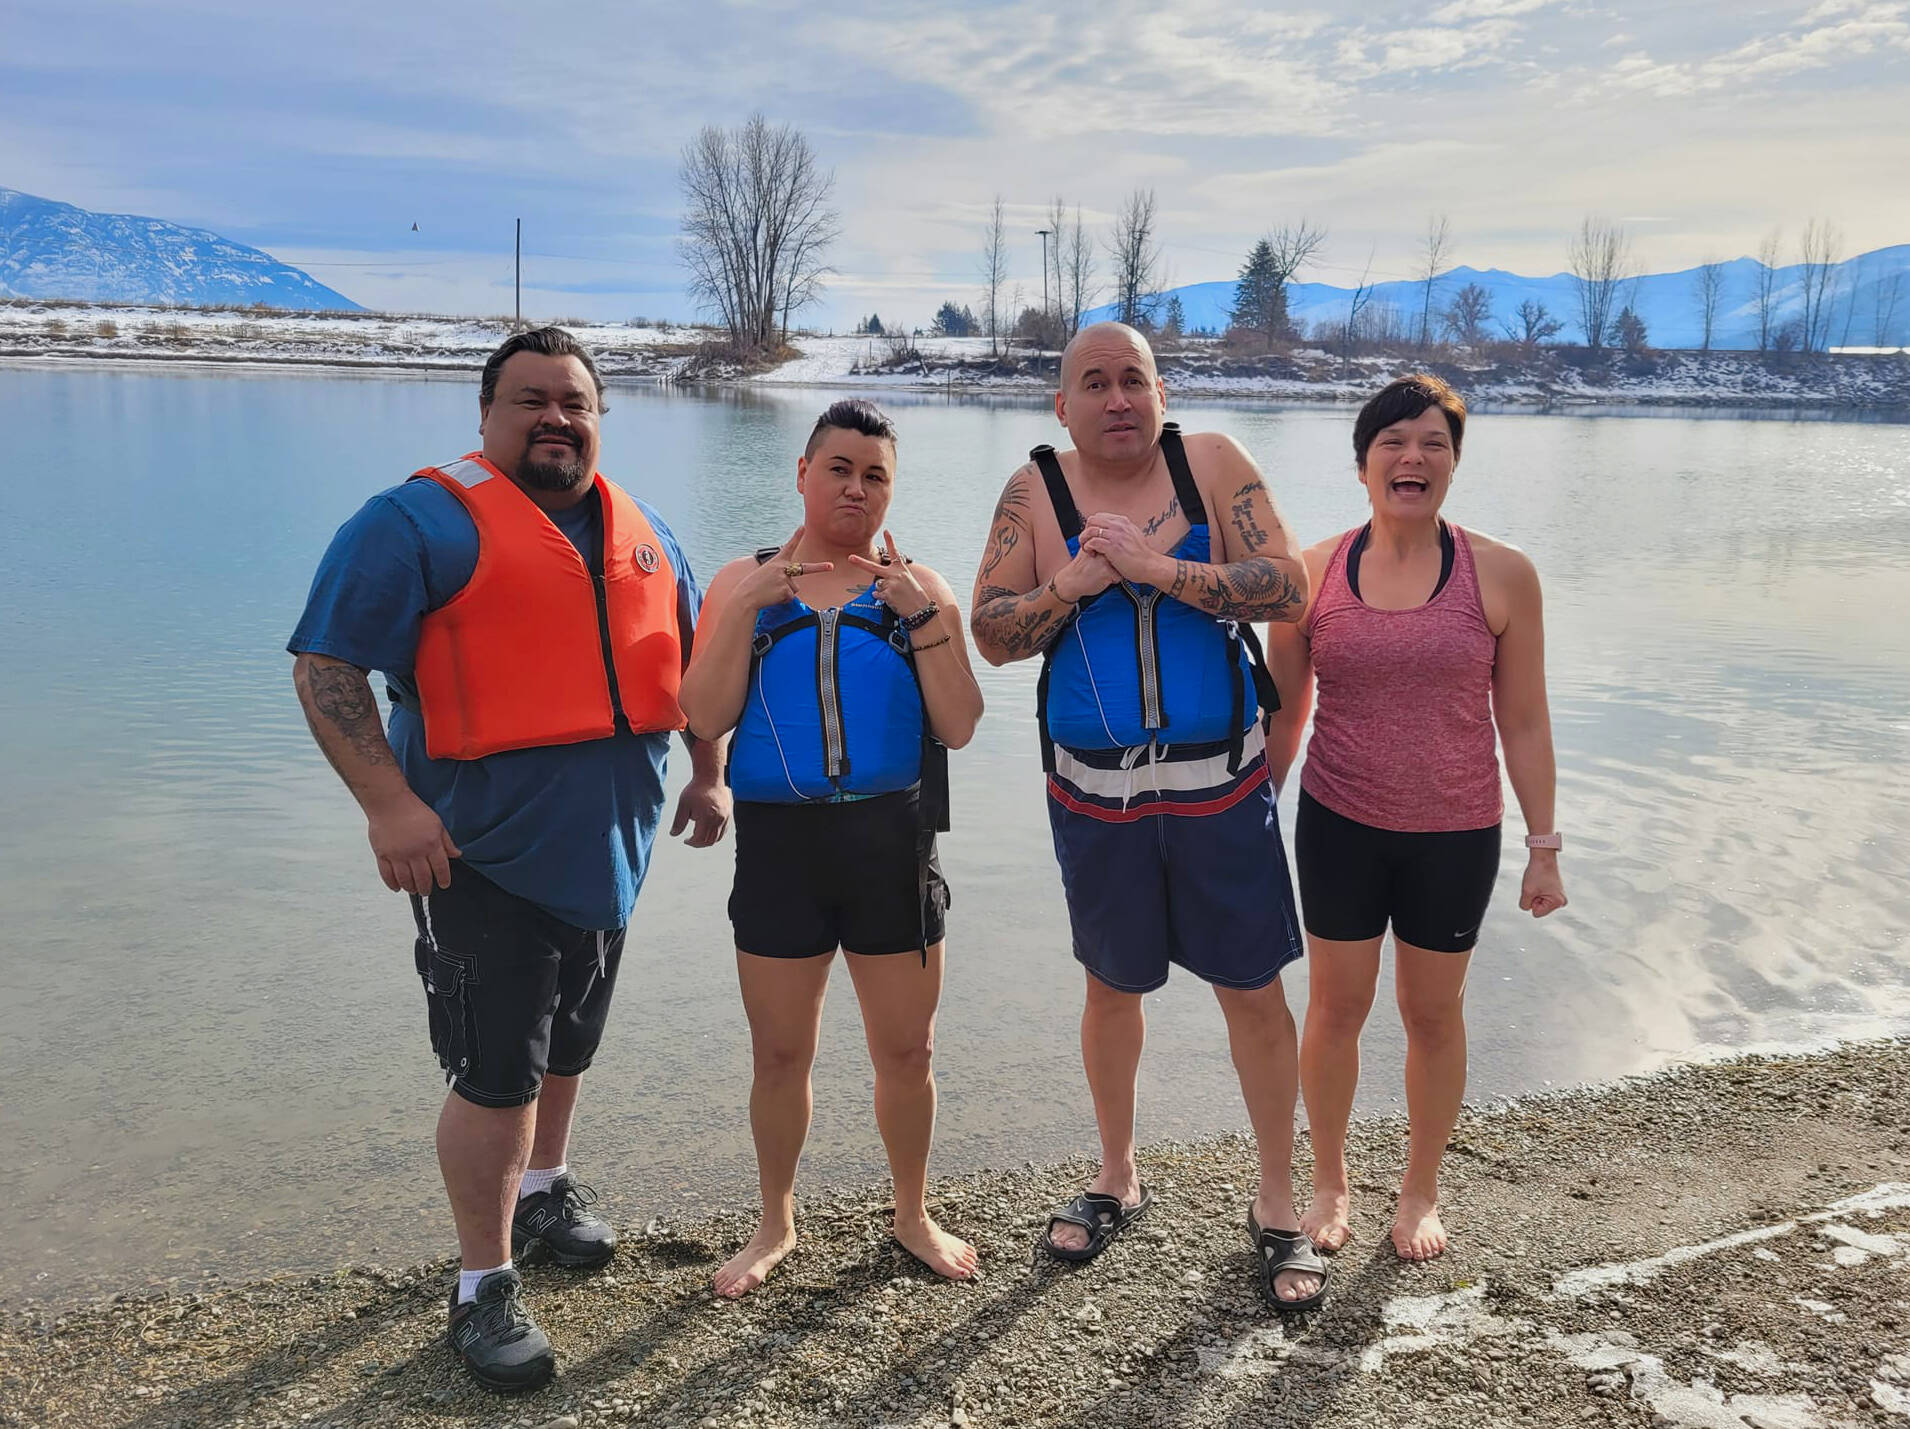 From left to right: Lower Kootenay Band council members Chad Luke, Cherie Luke, Nasukin Jason Louie, and Creston town councillor Denise Dumas get ready for an icy plunge into the Kootenay River on Feb. 3. (Photo by Kelsey Yates)